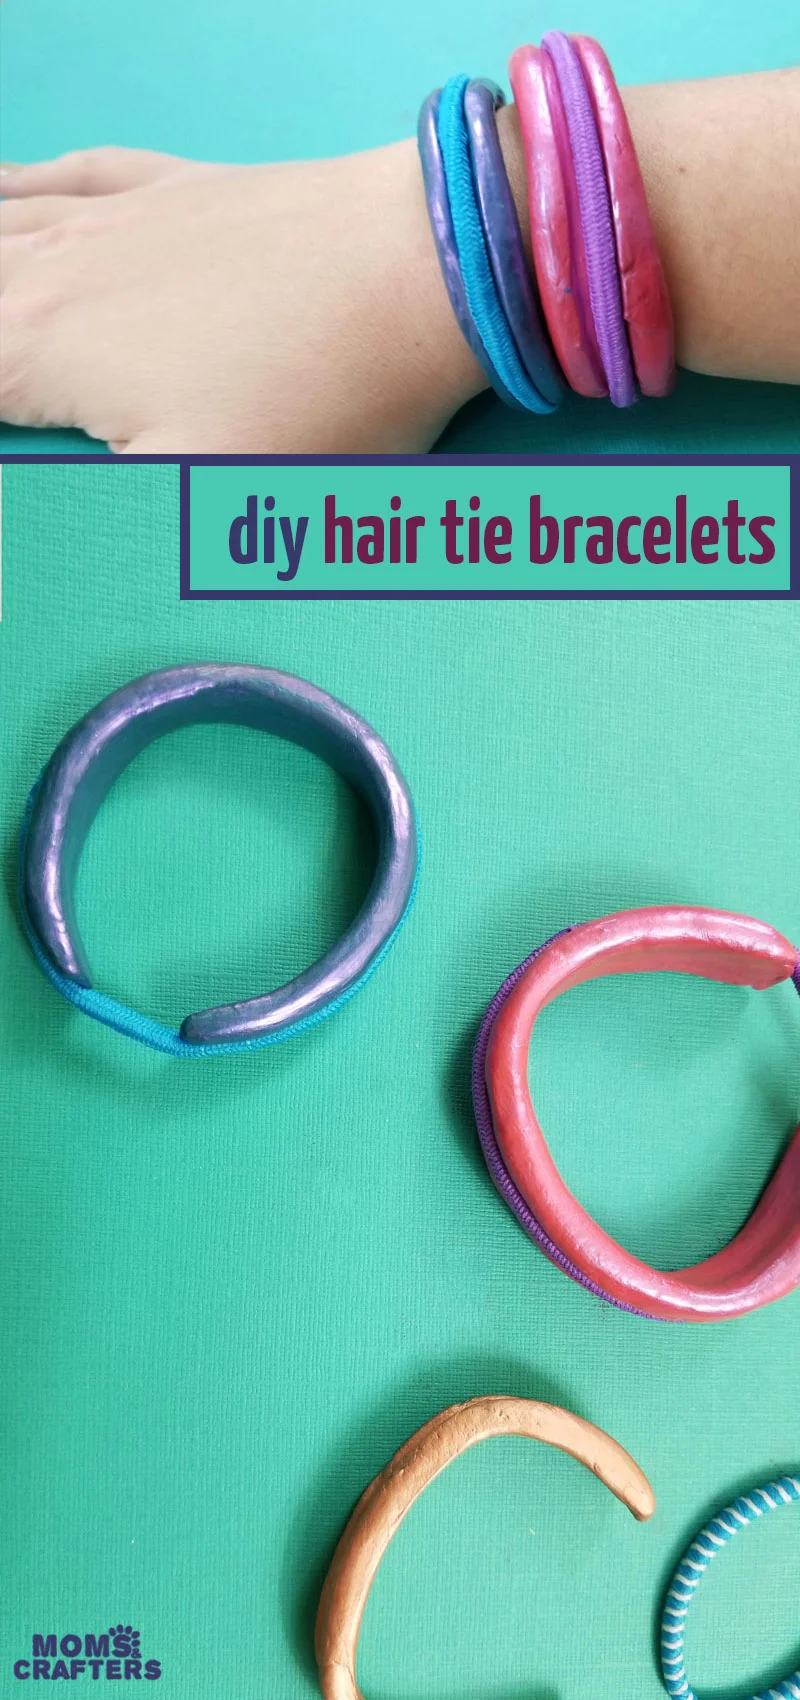 Click to learn how to make these hair tie bracelets DIY - this fun and easy clay jewelry making craft for teens and tweens (and grown-ups) is perfect for beginners! You'll love this easy craft tutorial for hair tie bracelets to serve as a bangle holder for your ponytail holders. #polymerclay #jewelrymaking #teencrafts